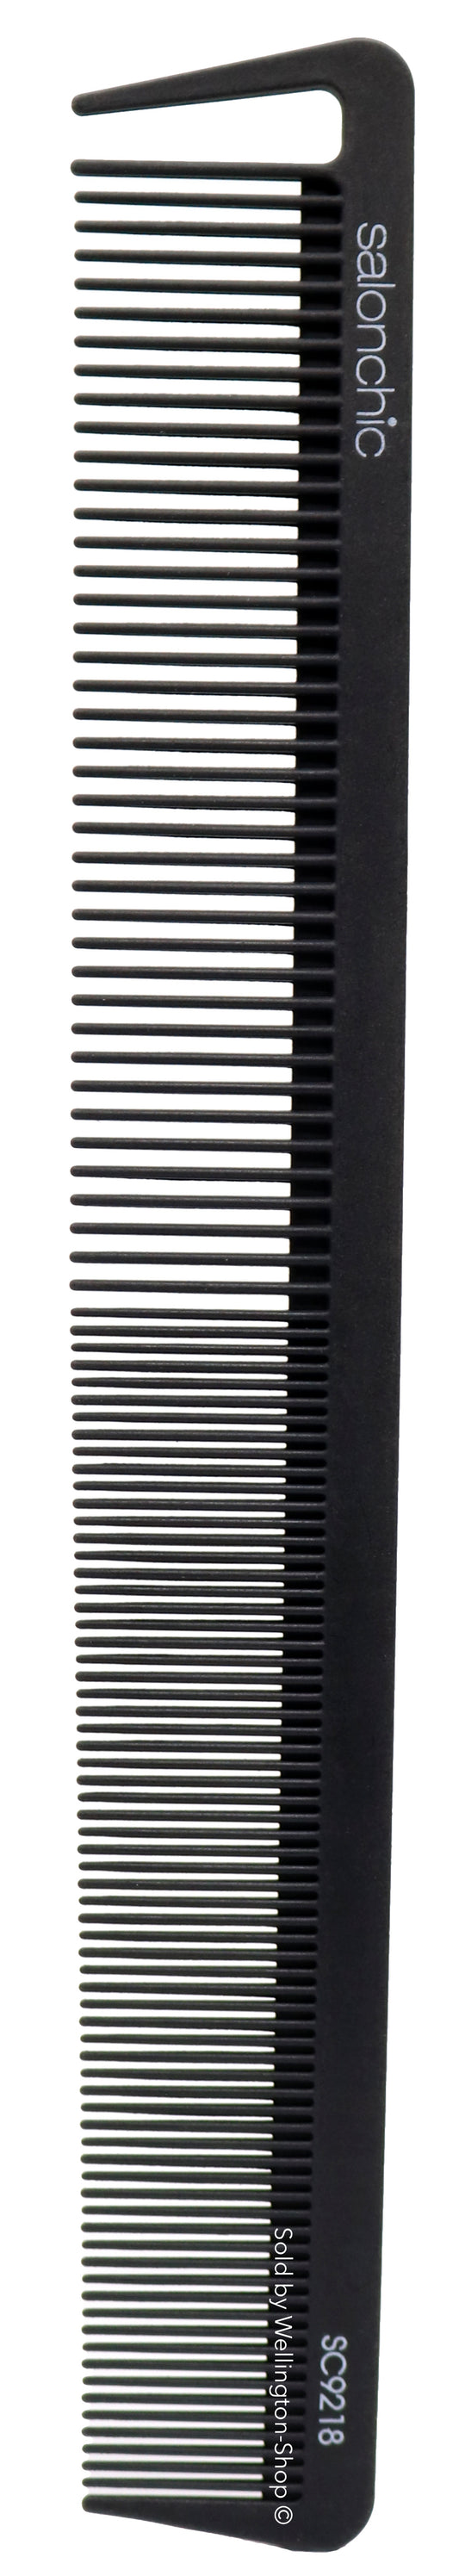 Salonchic 8.5 Inch High Heat Resistant Carbon Comb. Hair Cutting Comb. 1 pc.